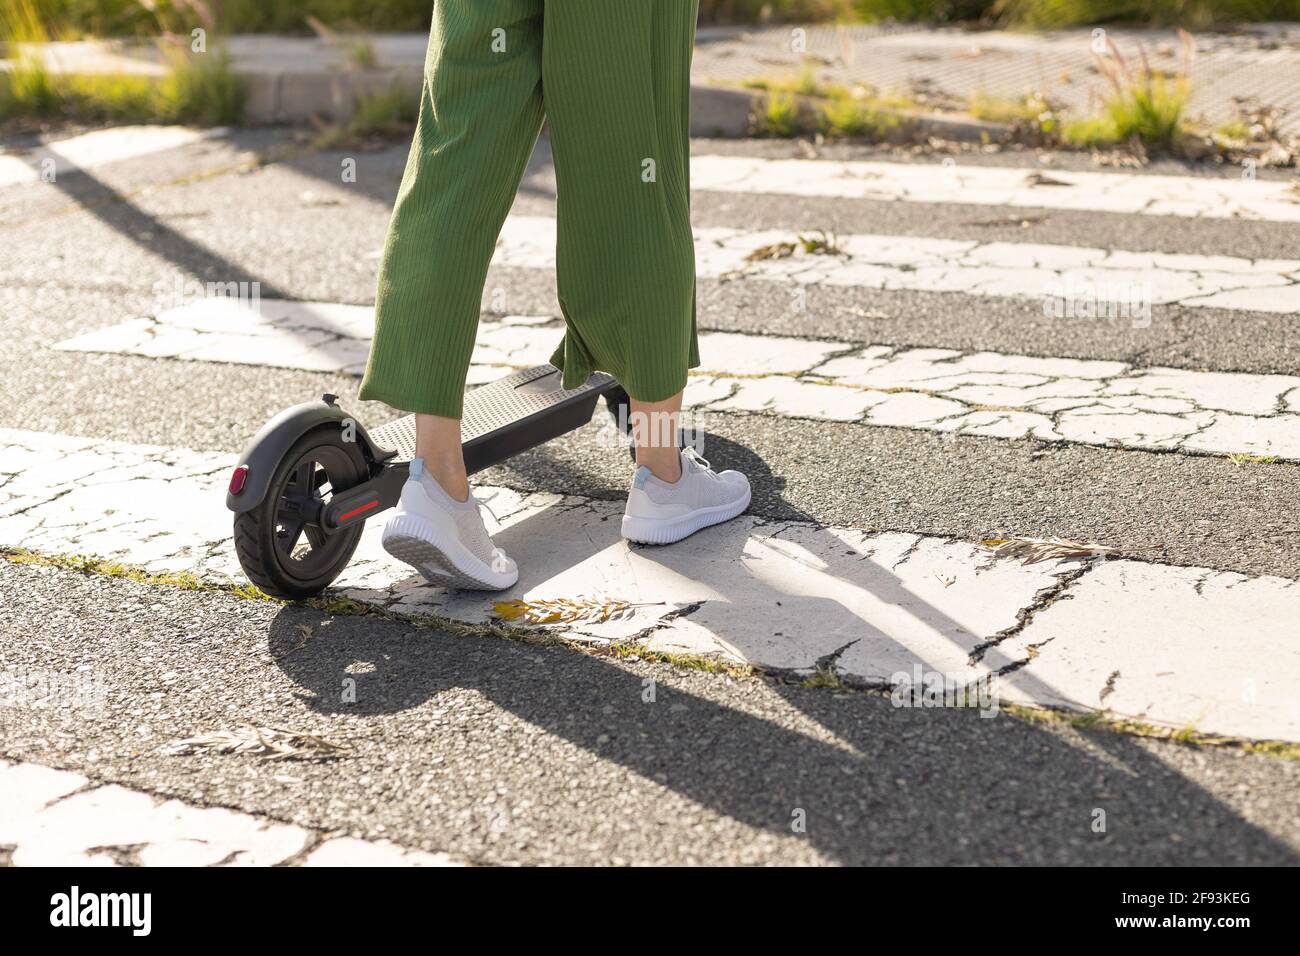 Unrecognisable woman on electric scooter crosses street Stock Photo